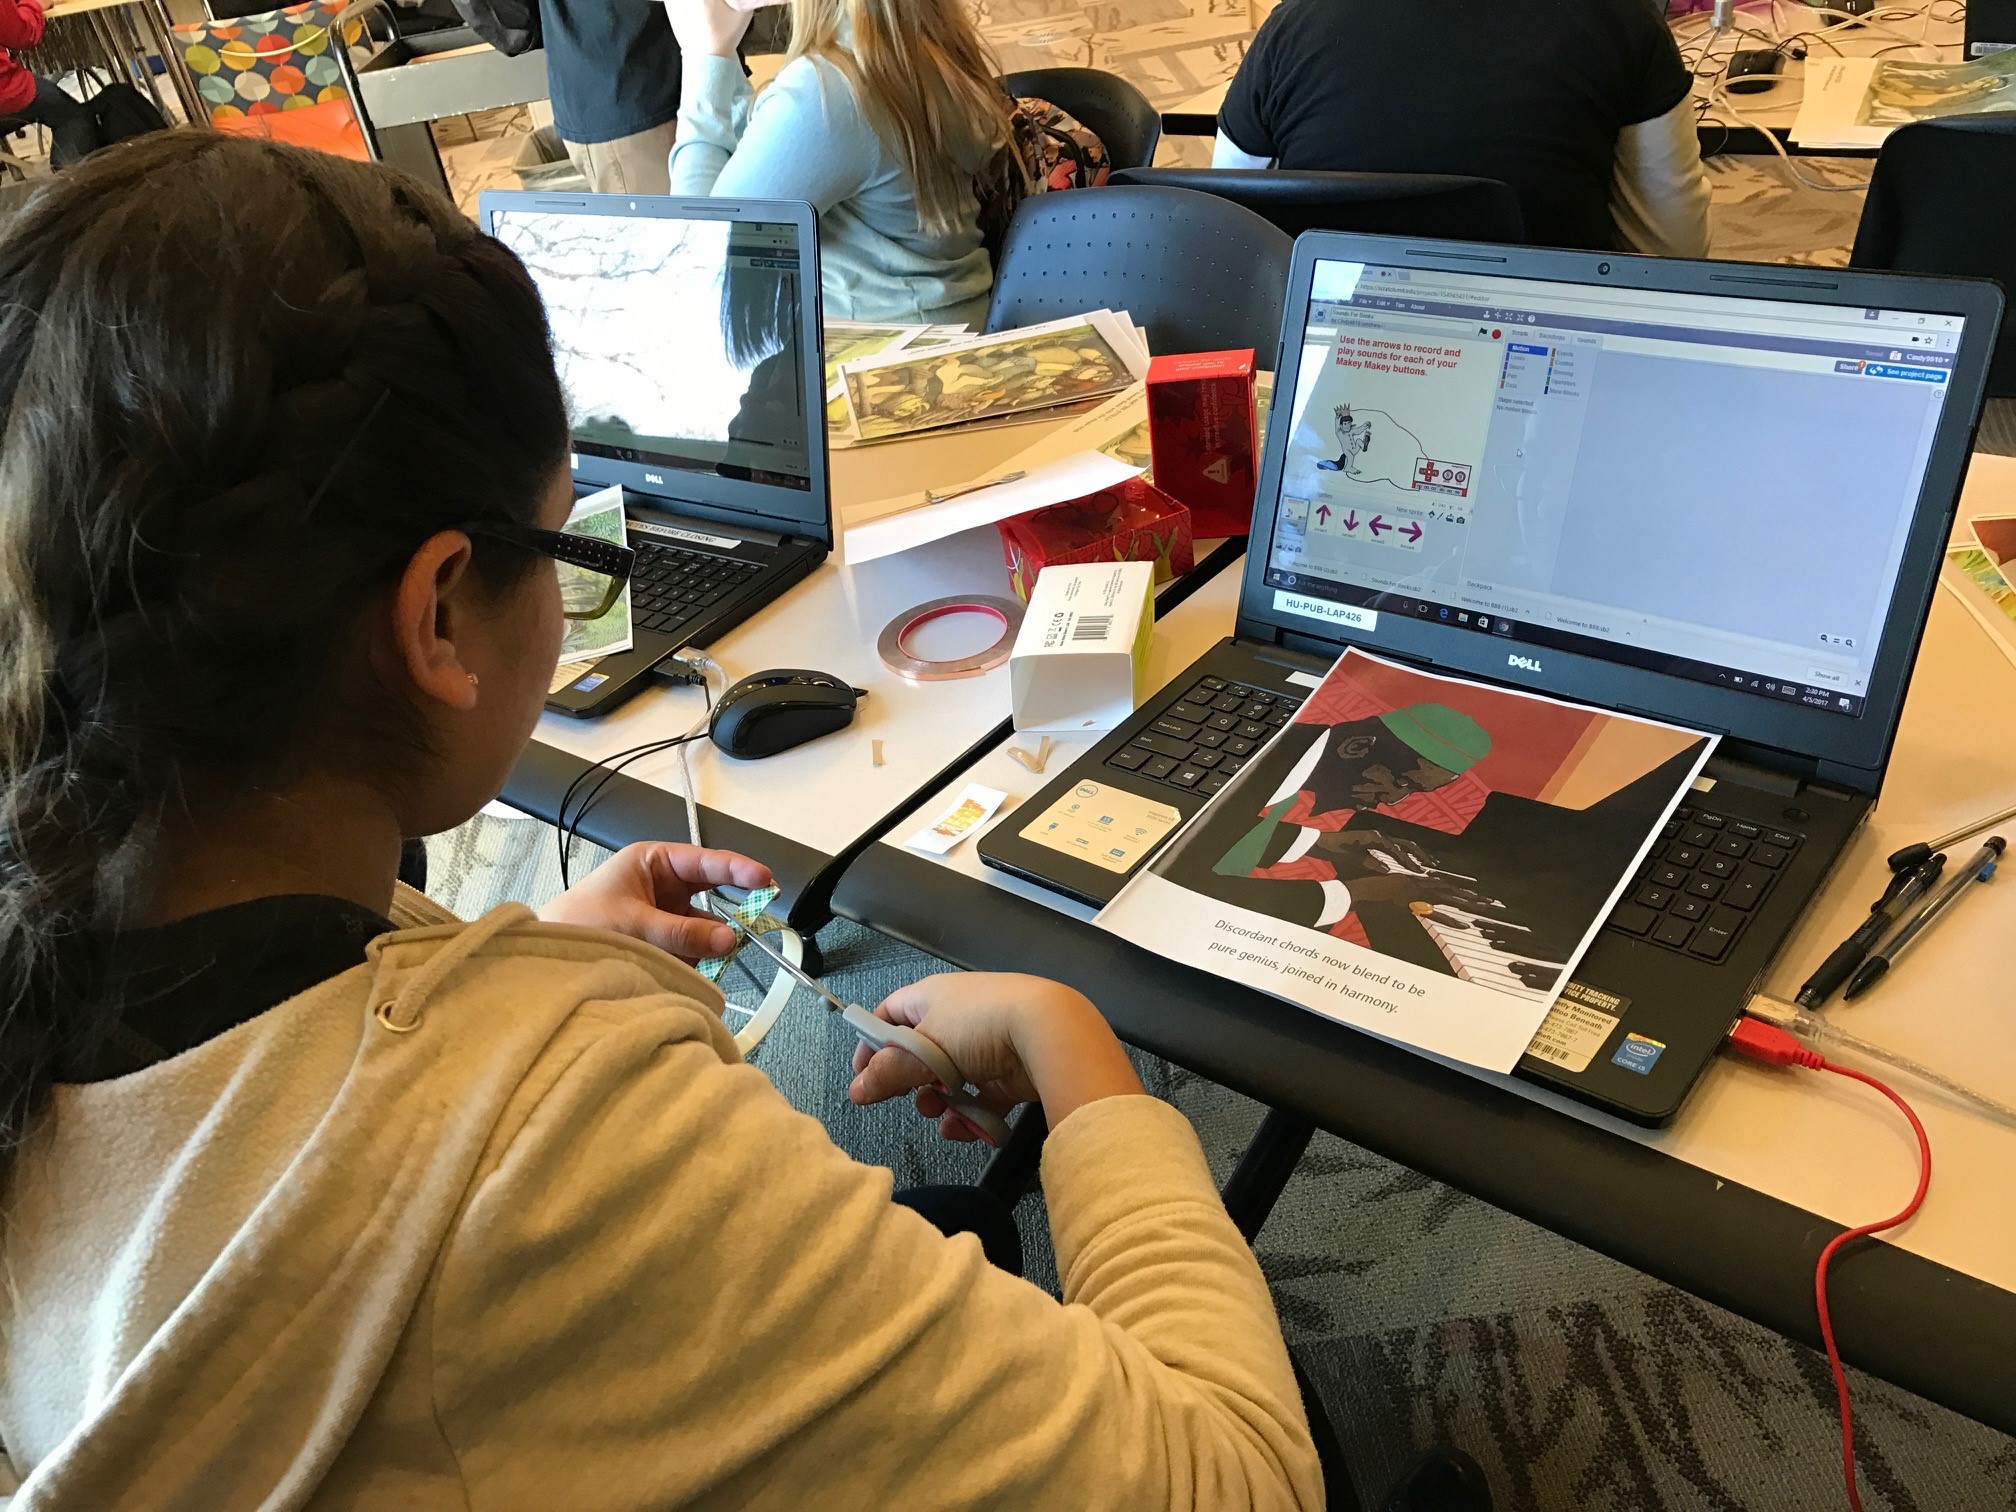 Photograph of a teen working on creating a tactile book, they are cutting out designs in front of an open laptop.